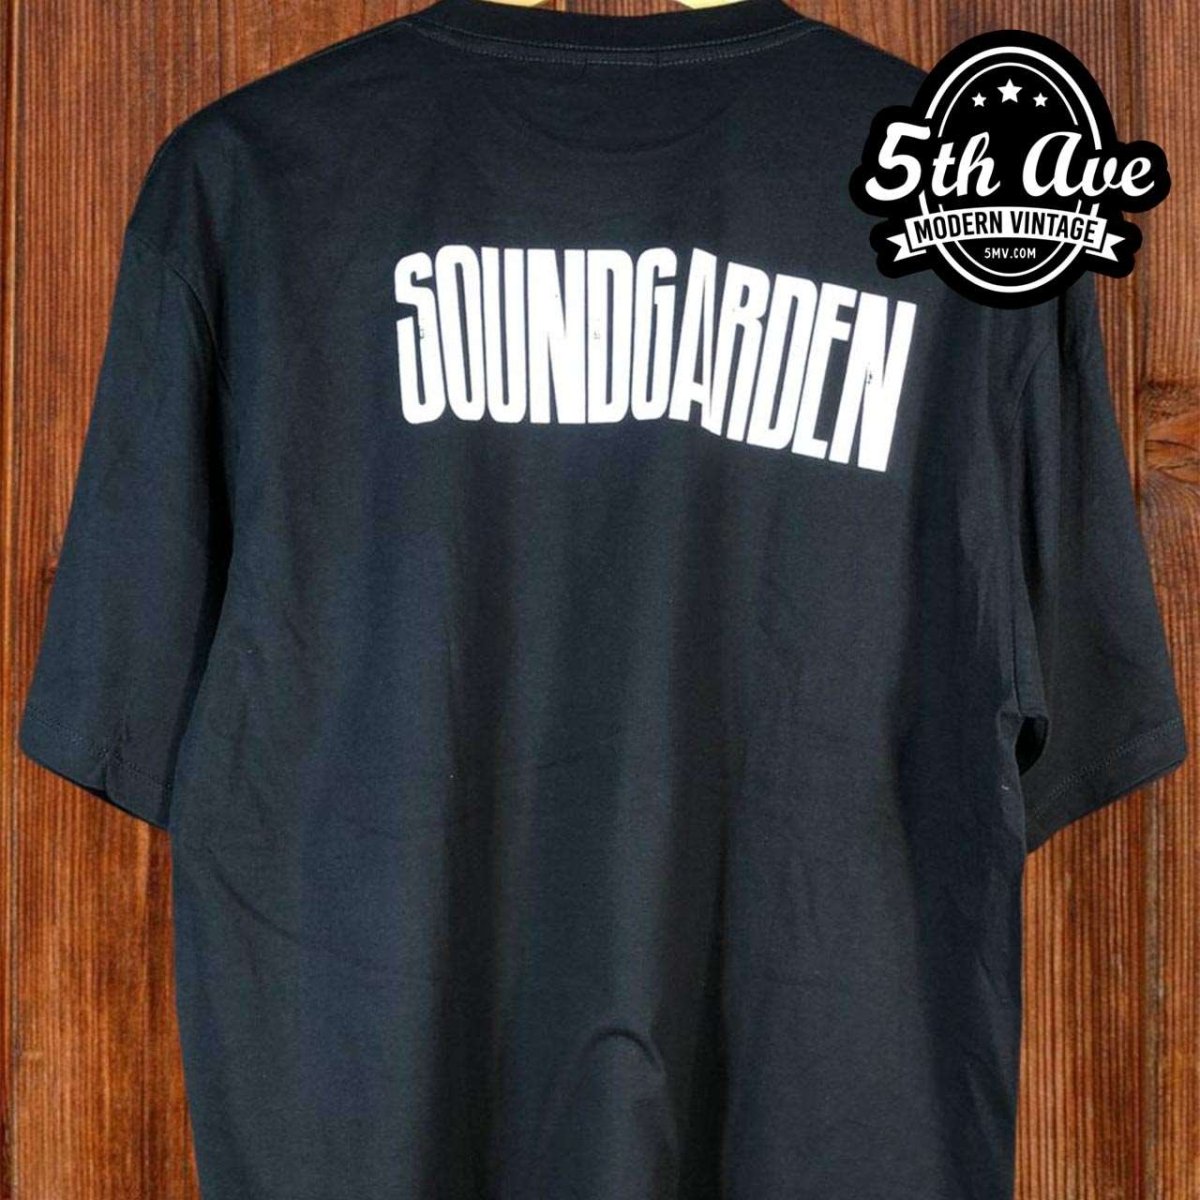 Bad Motor Finger: Rev Up Your Style with Soundgarden! - Vintage Band Shirts